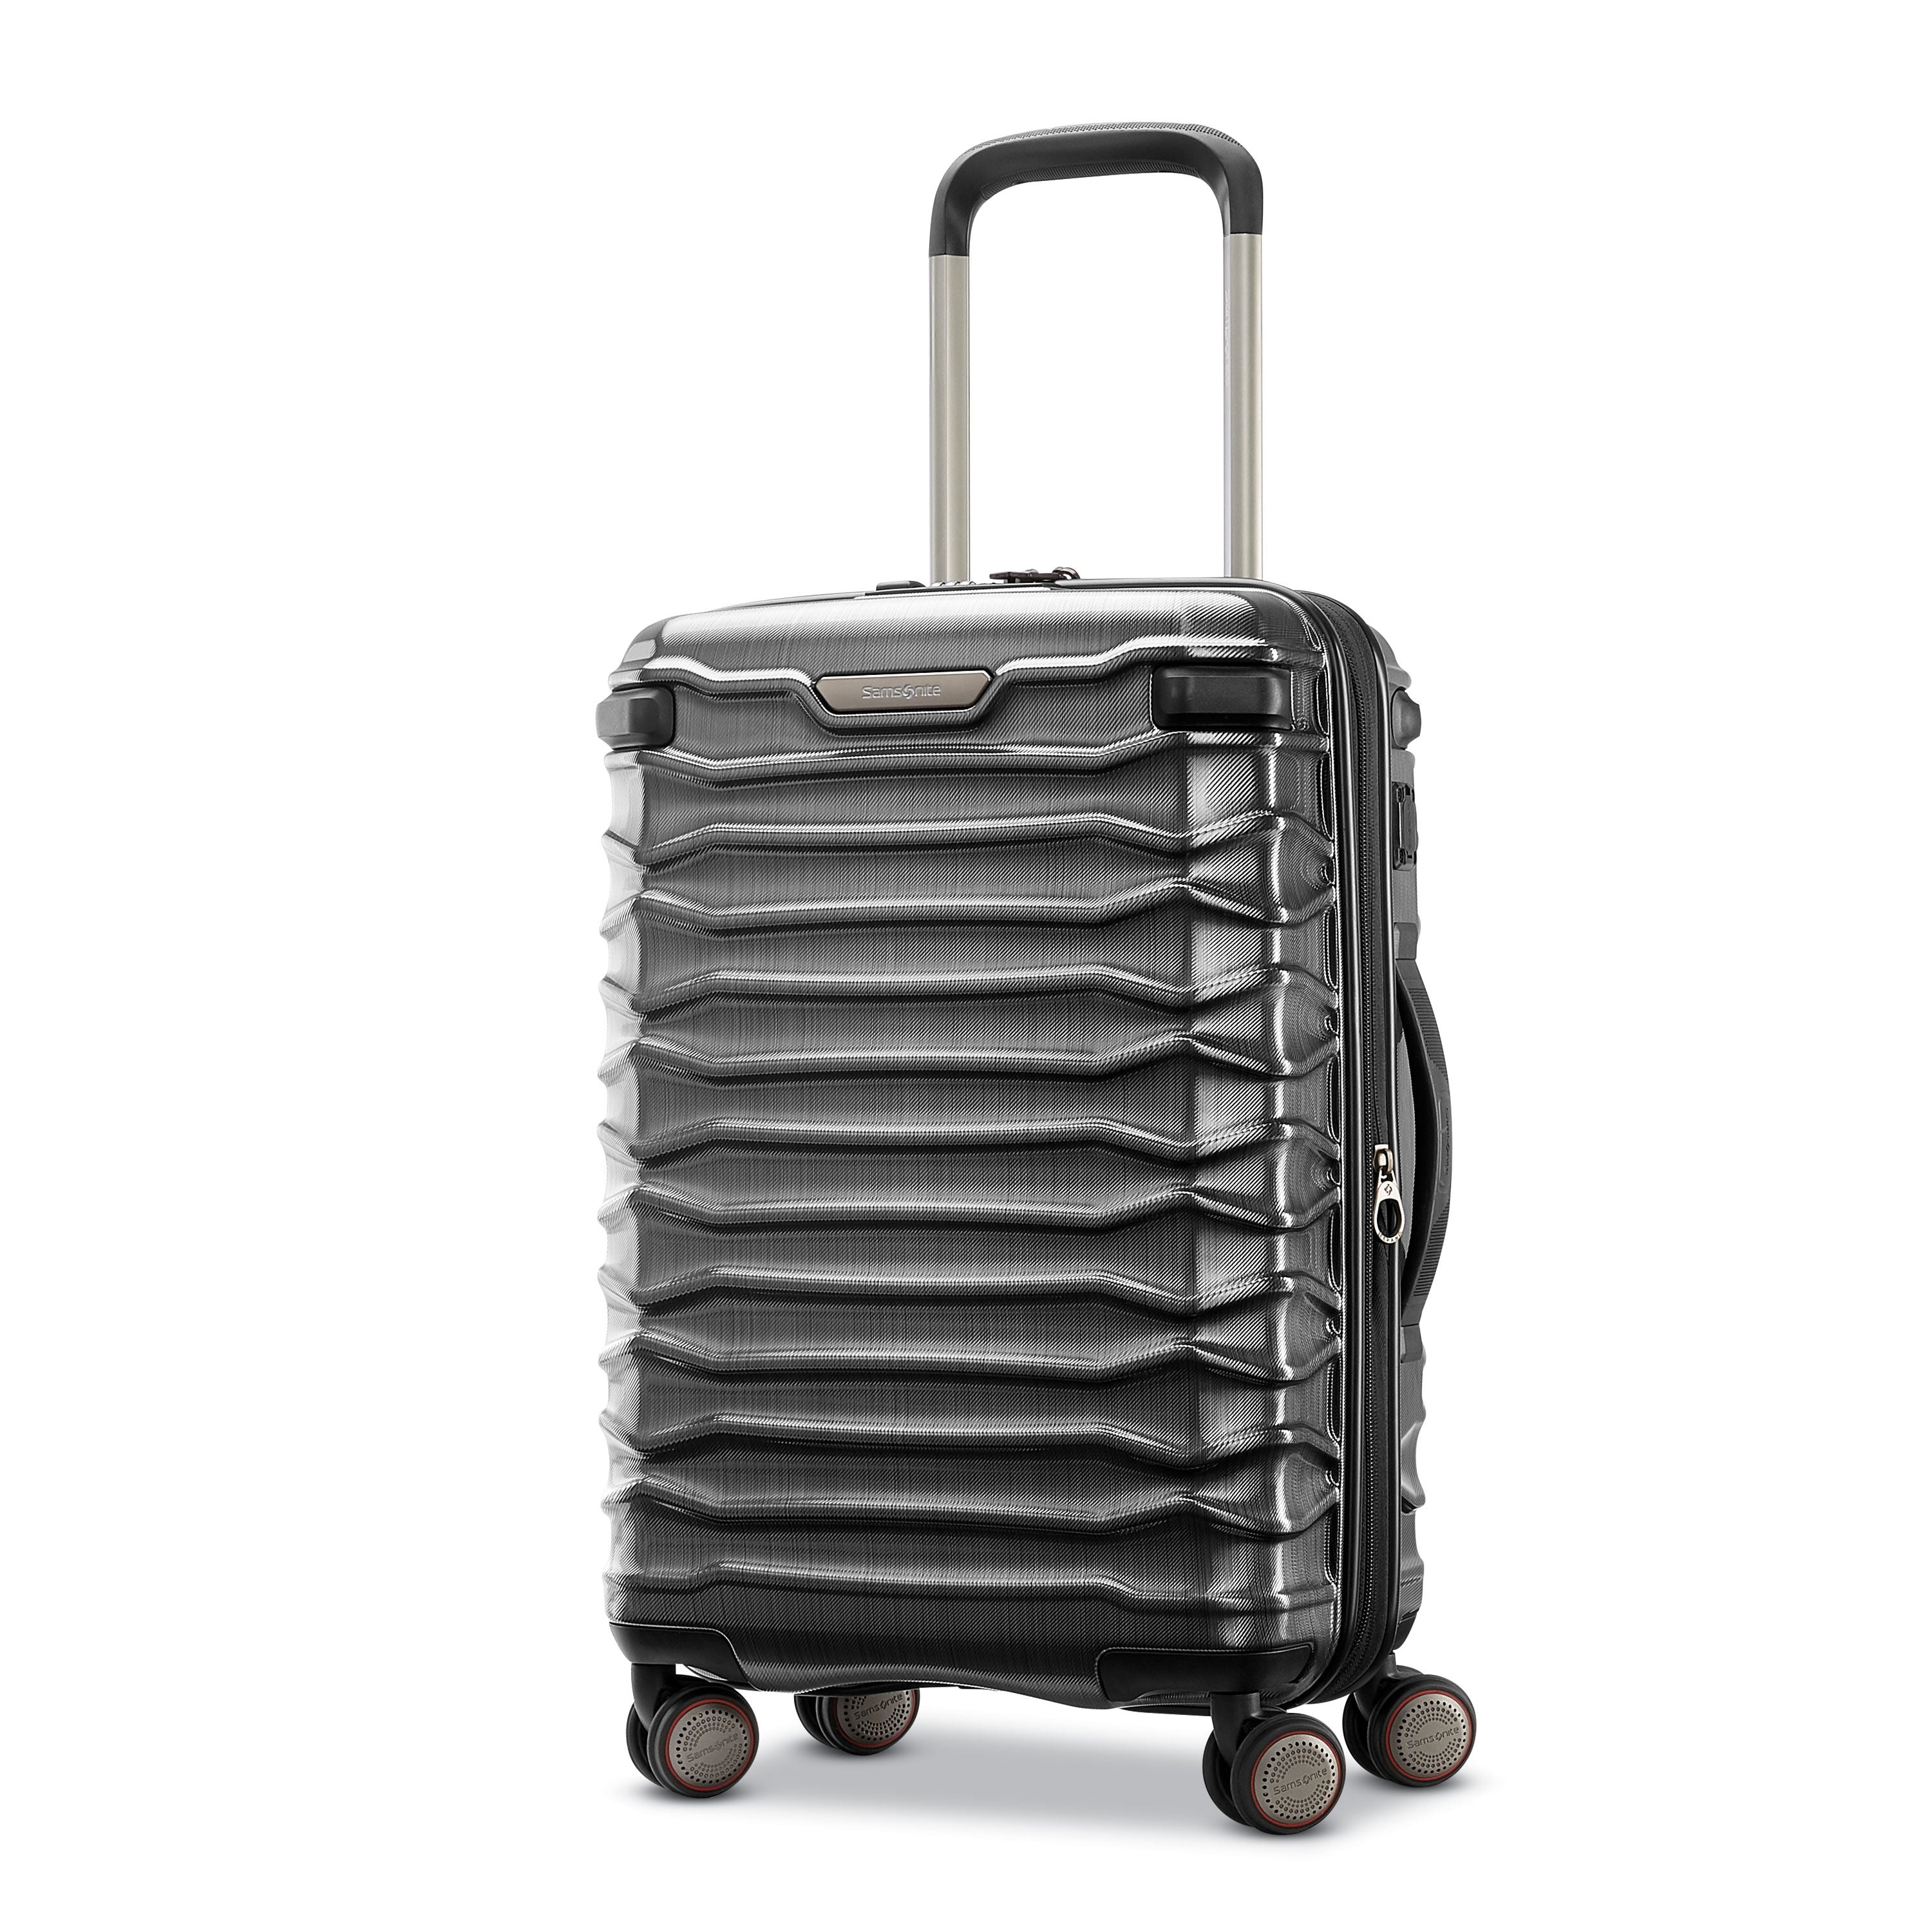 Stryde 2 22x14x9 Carry-On Glider